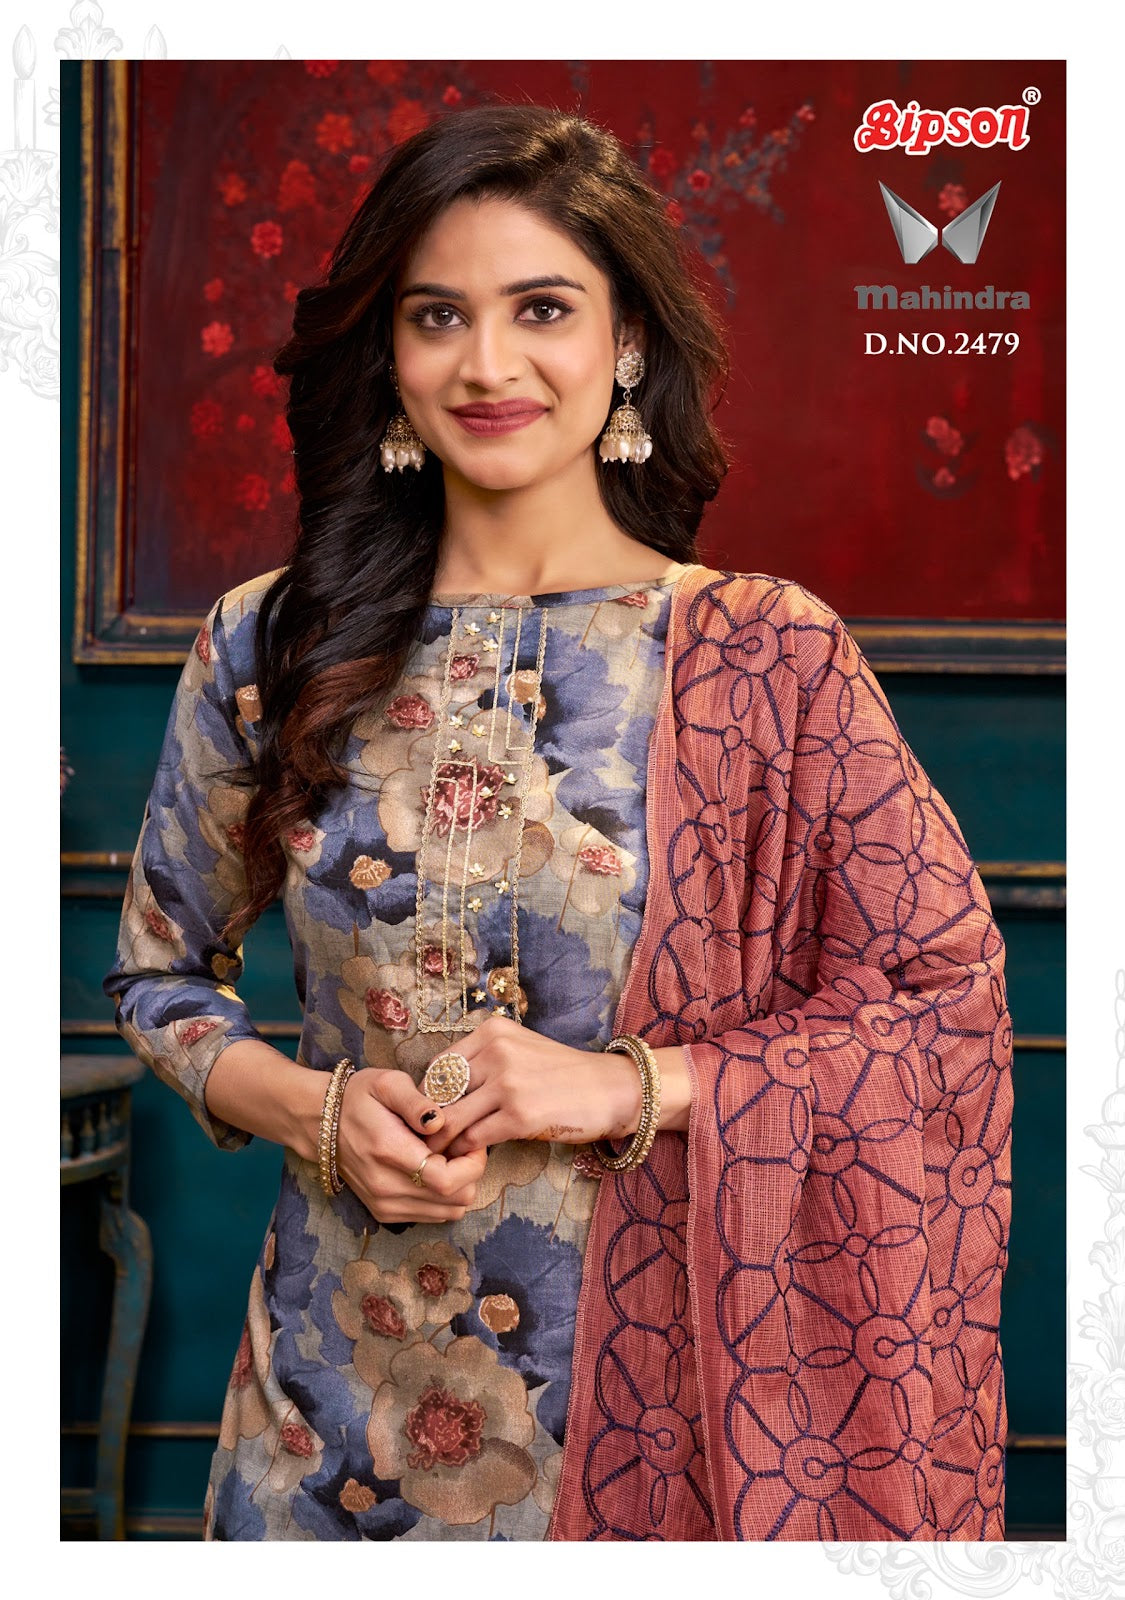 Mahindra 2479 Bipson Prints Cotton Pant Style Suits